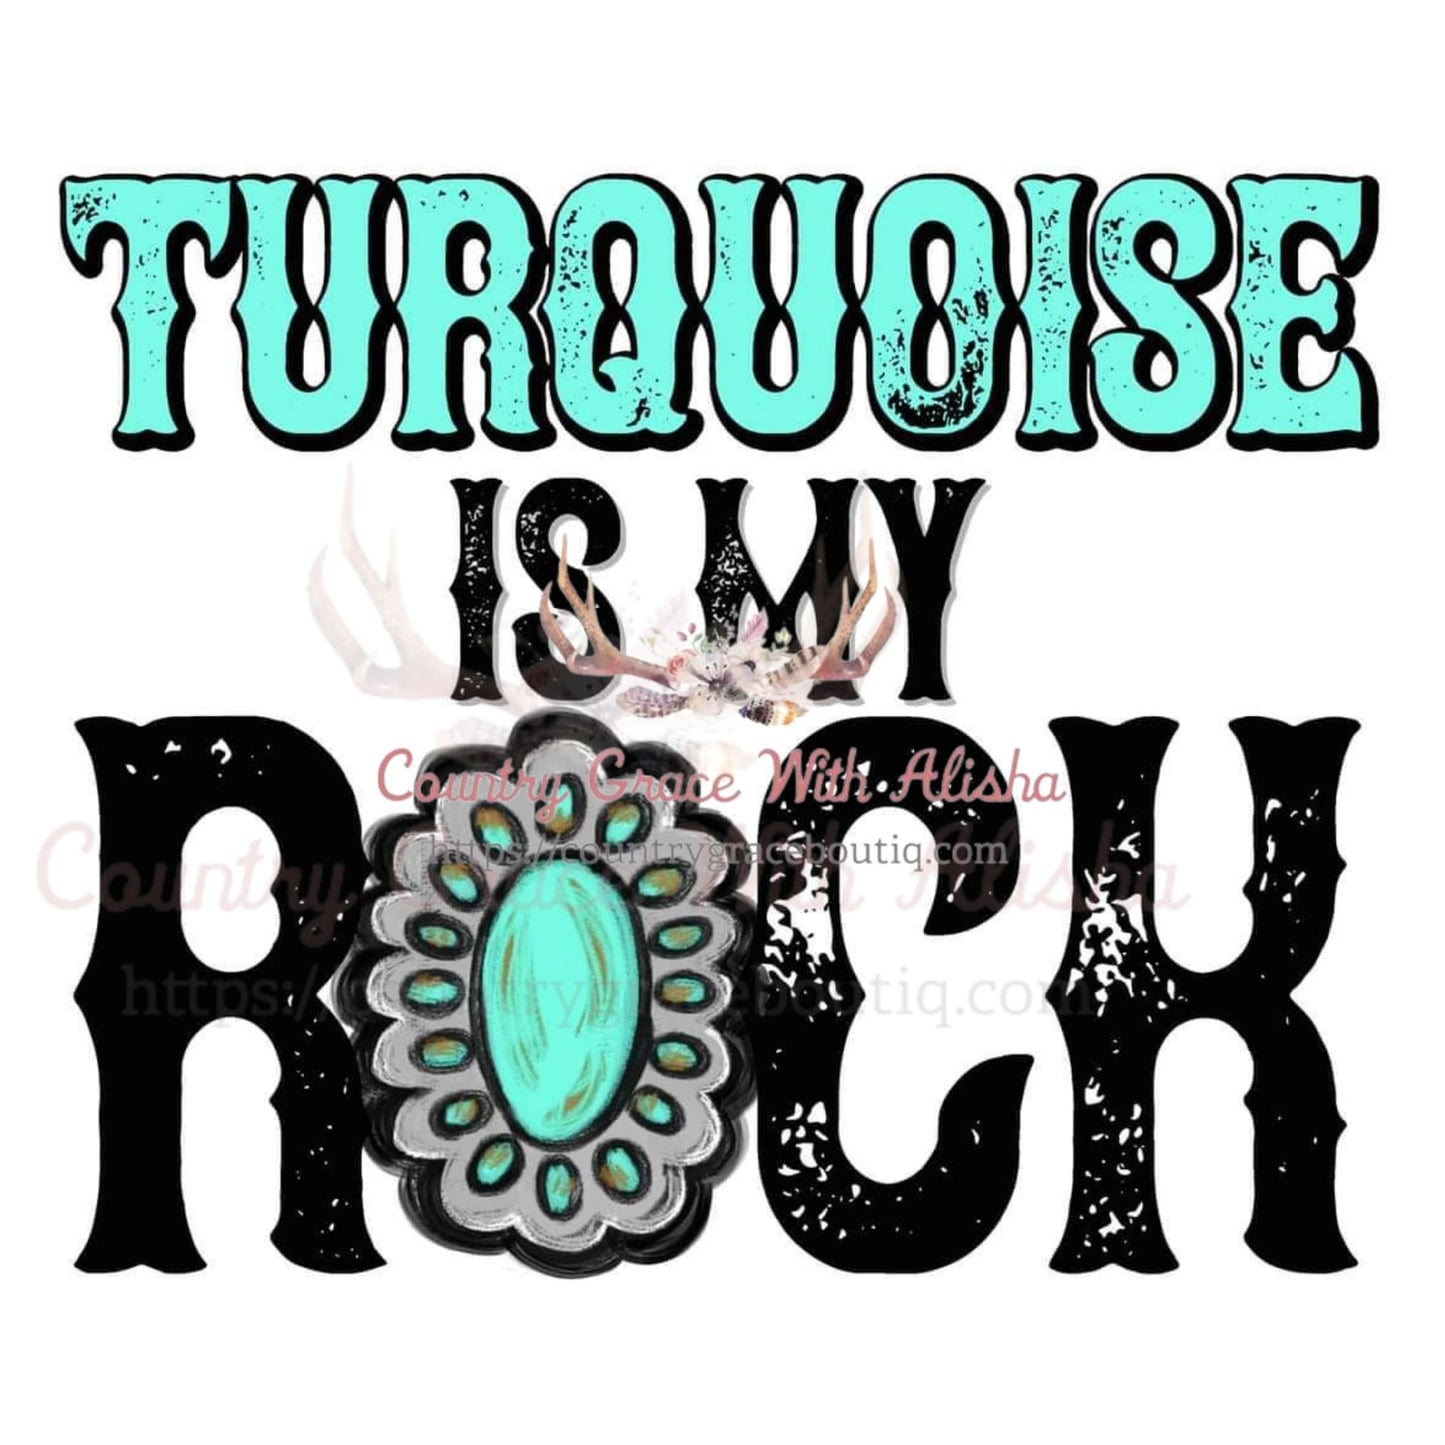 Turquoise Is My Rock Sublimation Transfer - Sub $1.50 